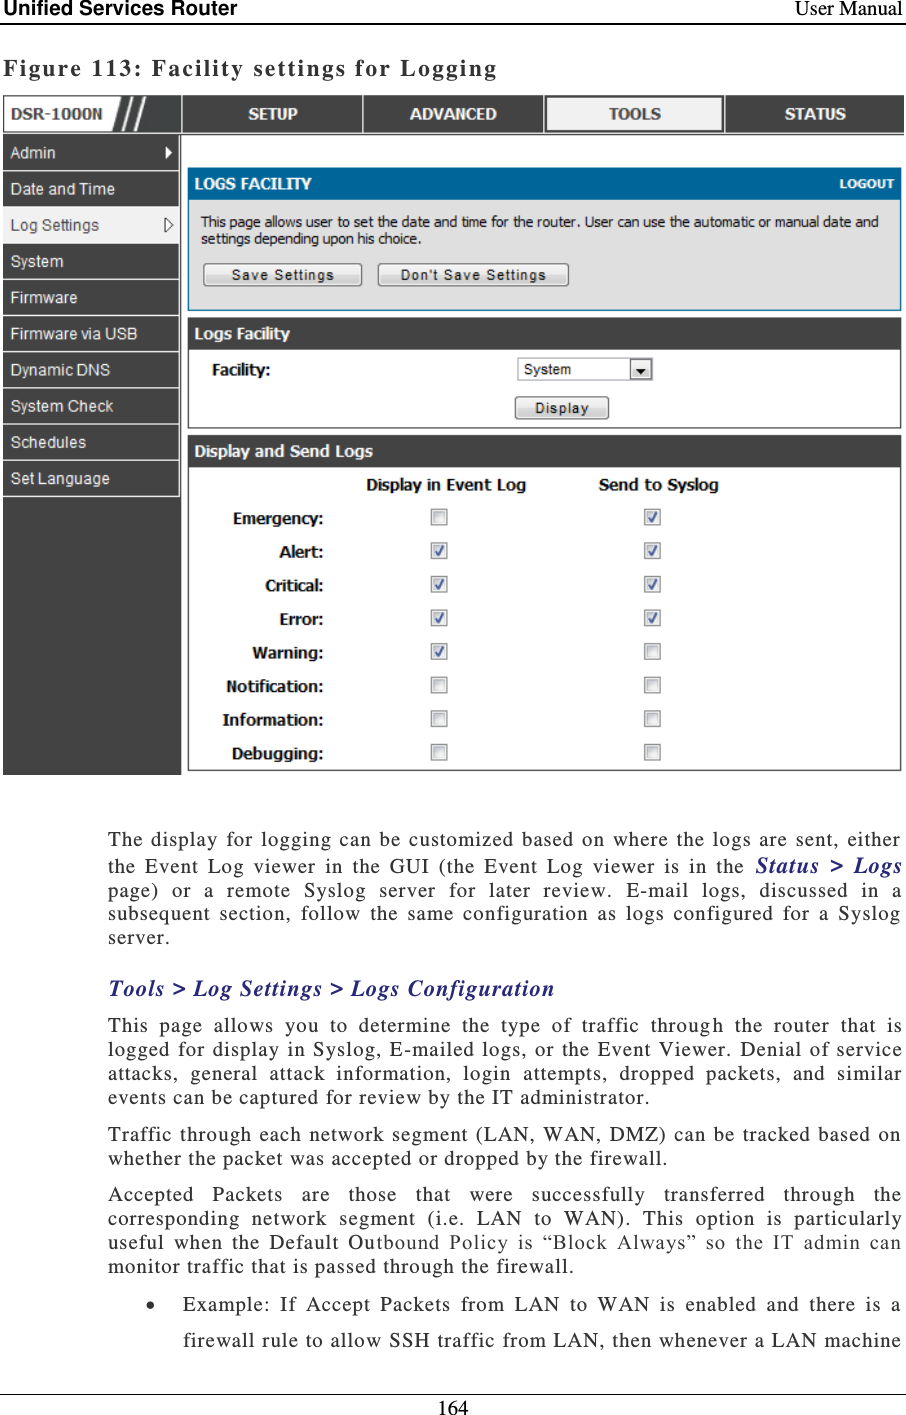 Unified Services Router    User Manual 164  Figure 113: Facility settings for Logging    The display  for  logging  can  be customized  based  on  where  the  logs  are  sent,  either the  Event  Log  viewer  in  the  GUI  (the  Event  Log  viewer  is  in  the  Status  &gt;  Logs page)  or  a  remote  Syslog  server  for  later  review.  E-mail  logs,  discussed  in  a subsequent  section,  follow  the  same  configuration  as  logs  configured  for  a  Syslog server. Tools &gt; Log Settings &gt; Logs Configuration This  page  allows  you  to  determine  the  type  of  traffic  throug h  the  router  that  is logged  for display  in  Syslog, E-mailed  logs, or  the  Event Viewer.   Denial  of service attacks,  general  attack  information,  login  attempts,  dropped  packets,  and  similar events can be captured for review by the IT administrator.   Traffic  through  each  network segment (LAN, WAN,  DMZ) can be  tracked based  on whether the packet was accepted or dropped by the firewall.   Accepted  Packets  are  those  that  were  successfully  transferred  through  the corresponding  network  segment  (i.e.  LAN  to  WAN).  This  option  is  particularly useful  when  the  Default  Outbound  Policy  is  “Block  Always”  so  the  IT  admin  can monitor traffic that is passed through the firewall.    Example:  If  Accept  Packets  from  LAN  to  WAN  is  enabled  and  there  is  a firewall rule to allow SSH traffic from LAN, then whenever a LAN machine 